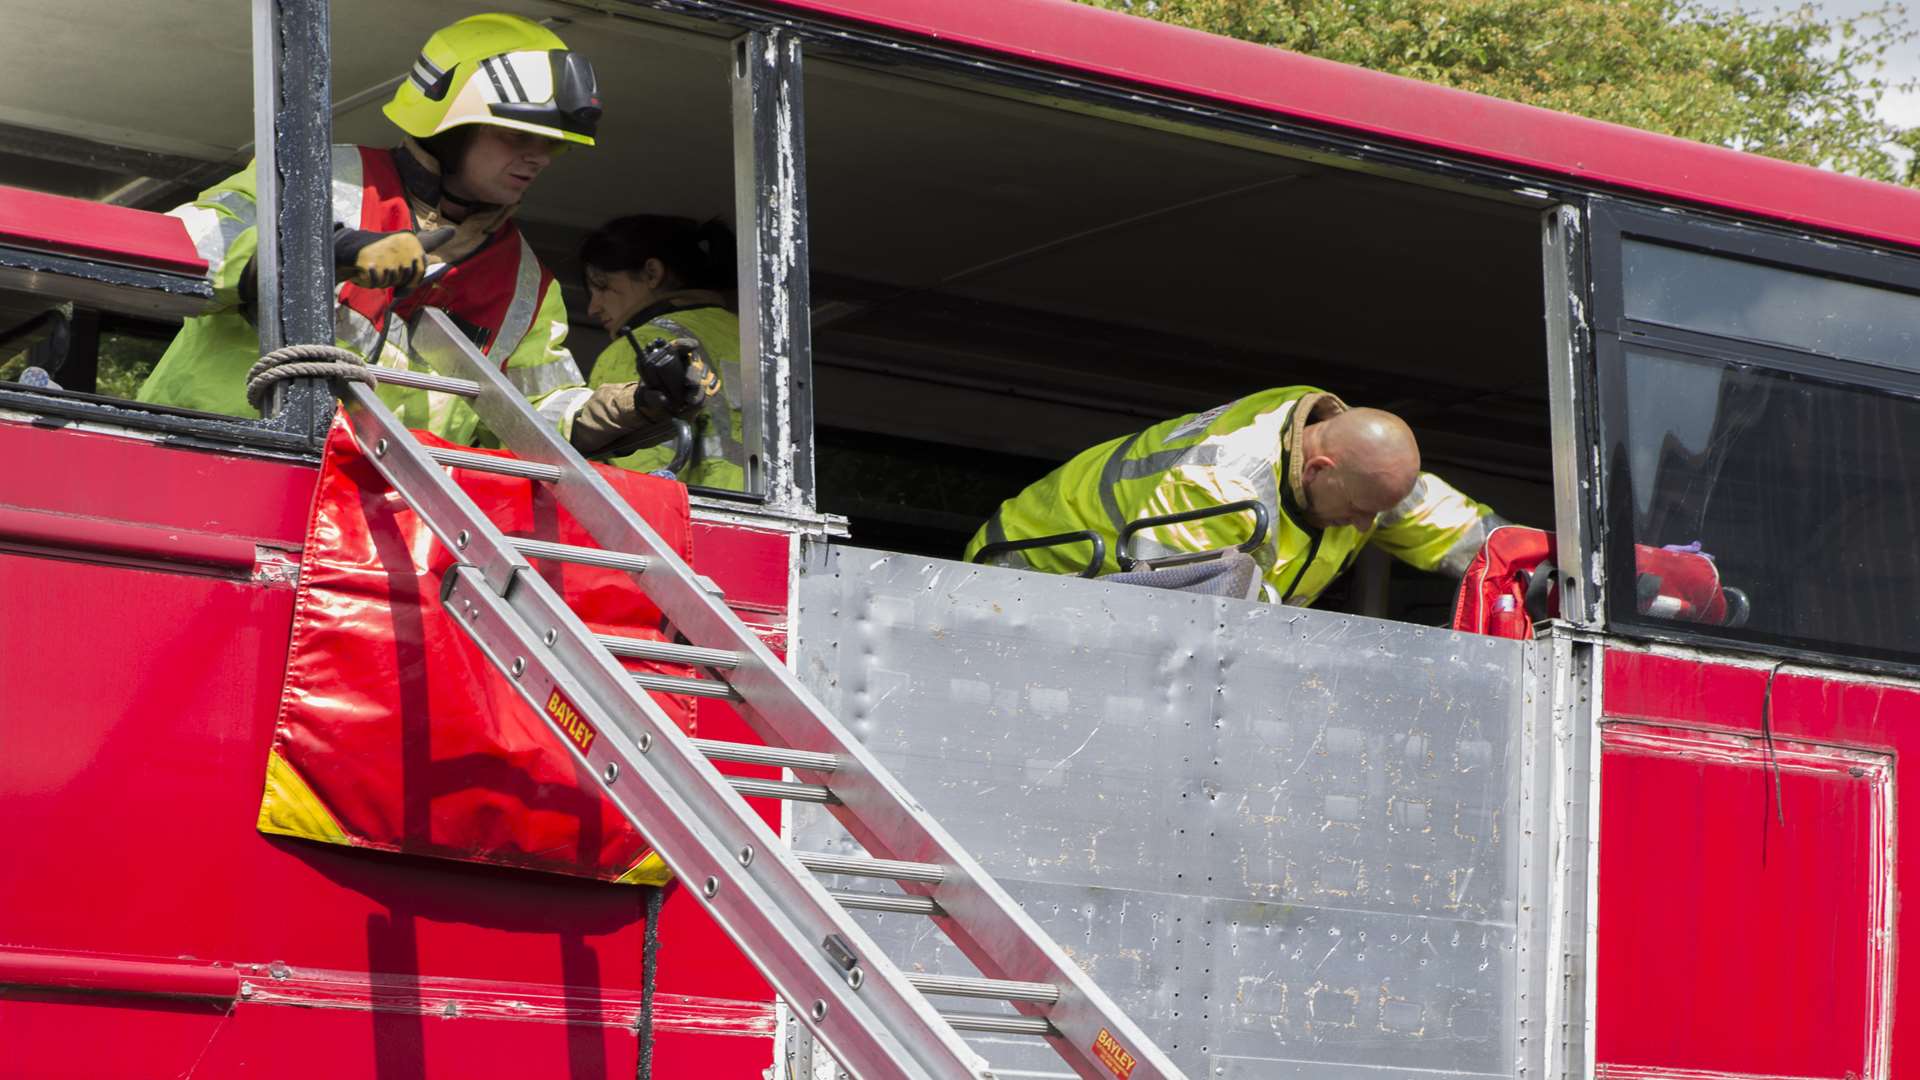 Firefighters assess the scene at the training exercise